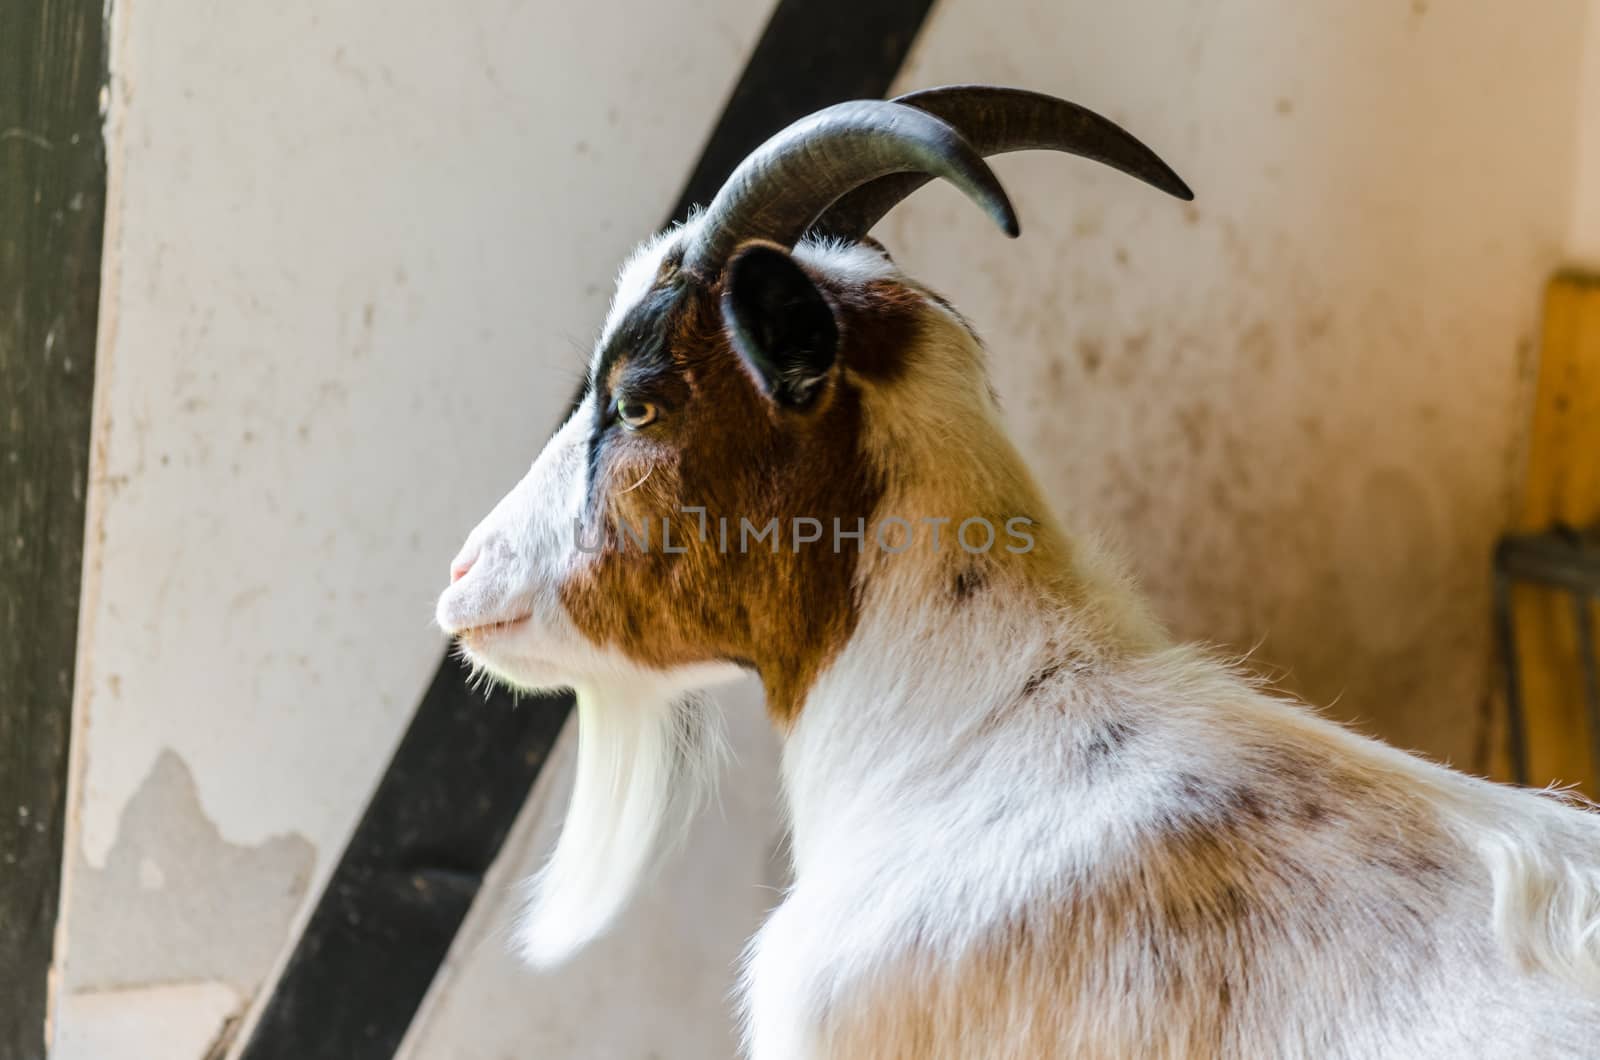 Young goat in the barn with brown and white spotted coat.